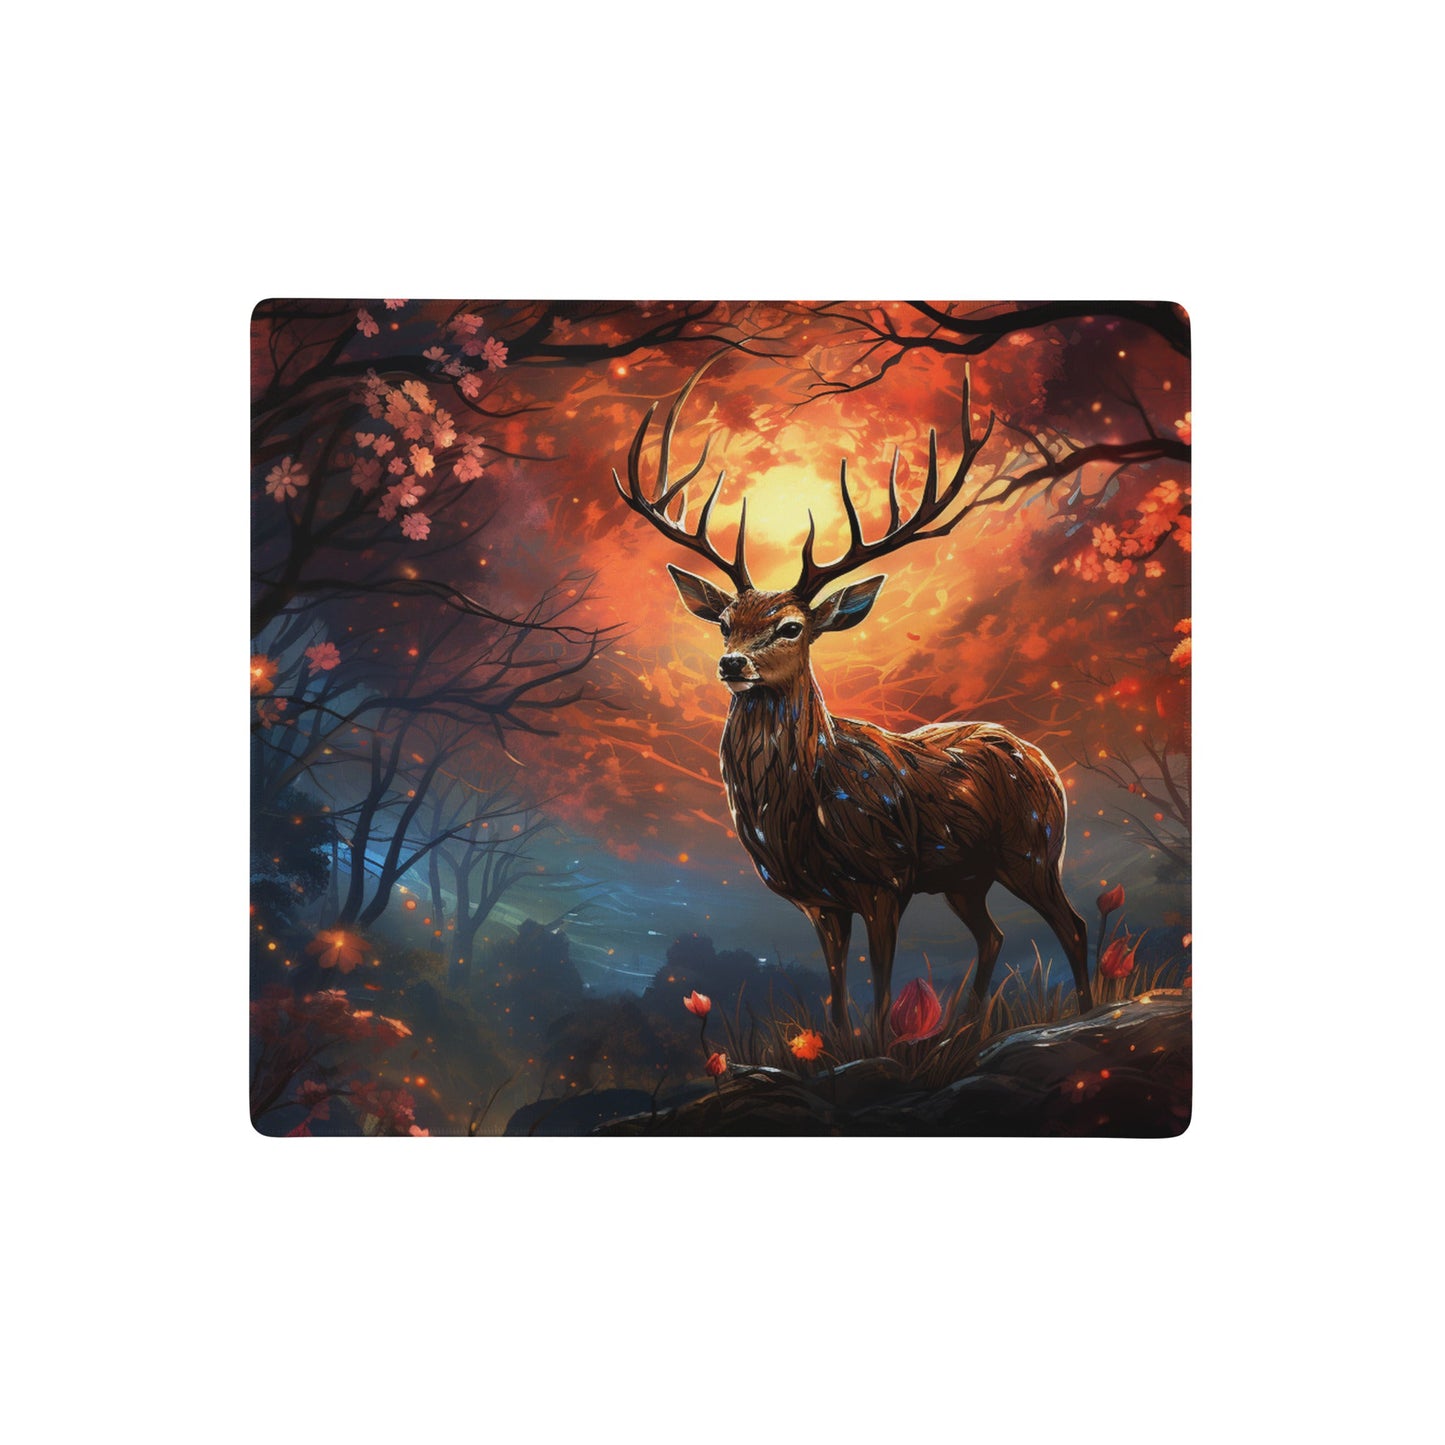 18″×16″ 2 Neduz Deer XXL Gaming mouse pad PRO with Non-Slip